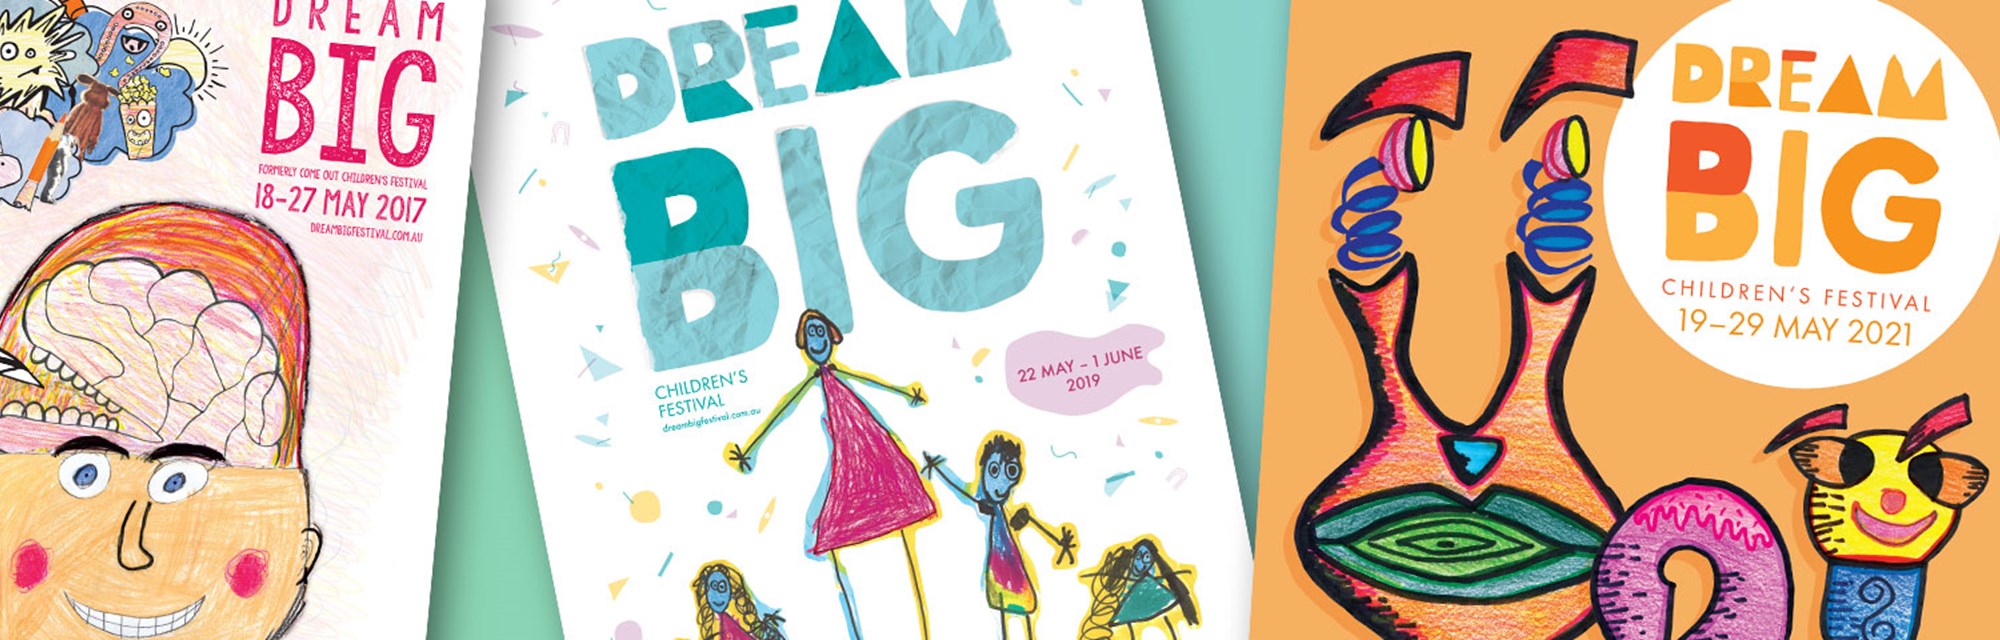 Dream Big Poster Competition